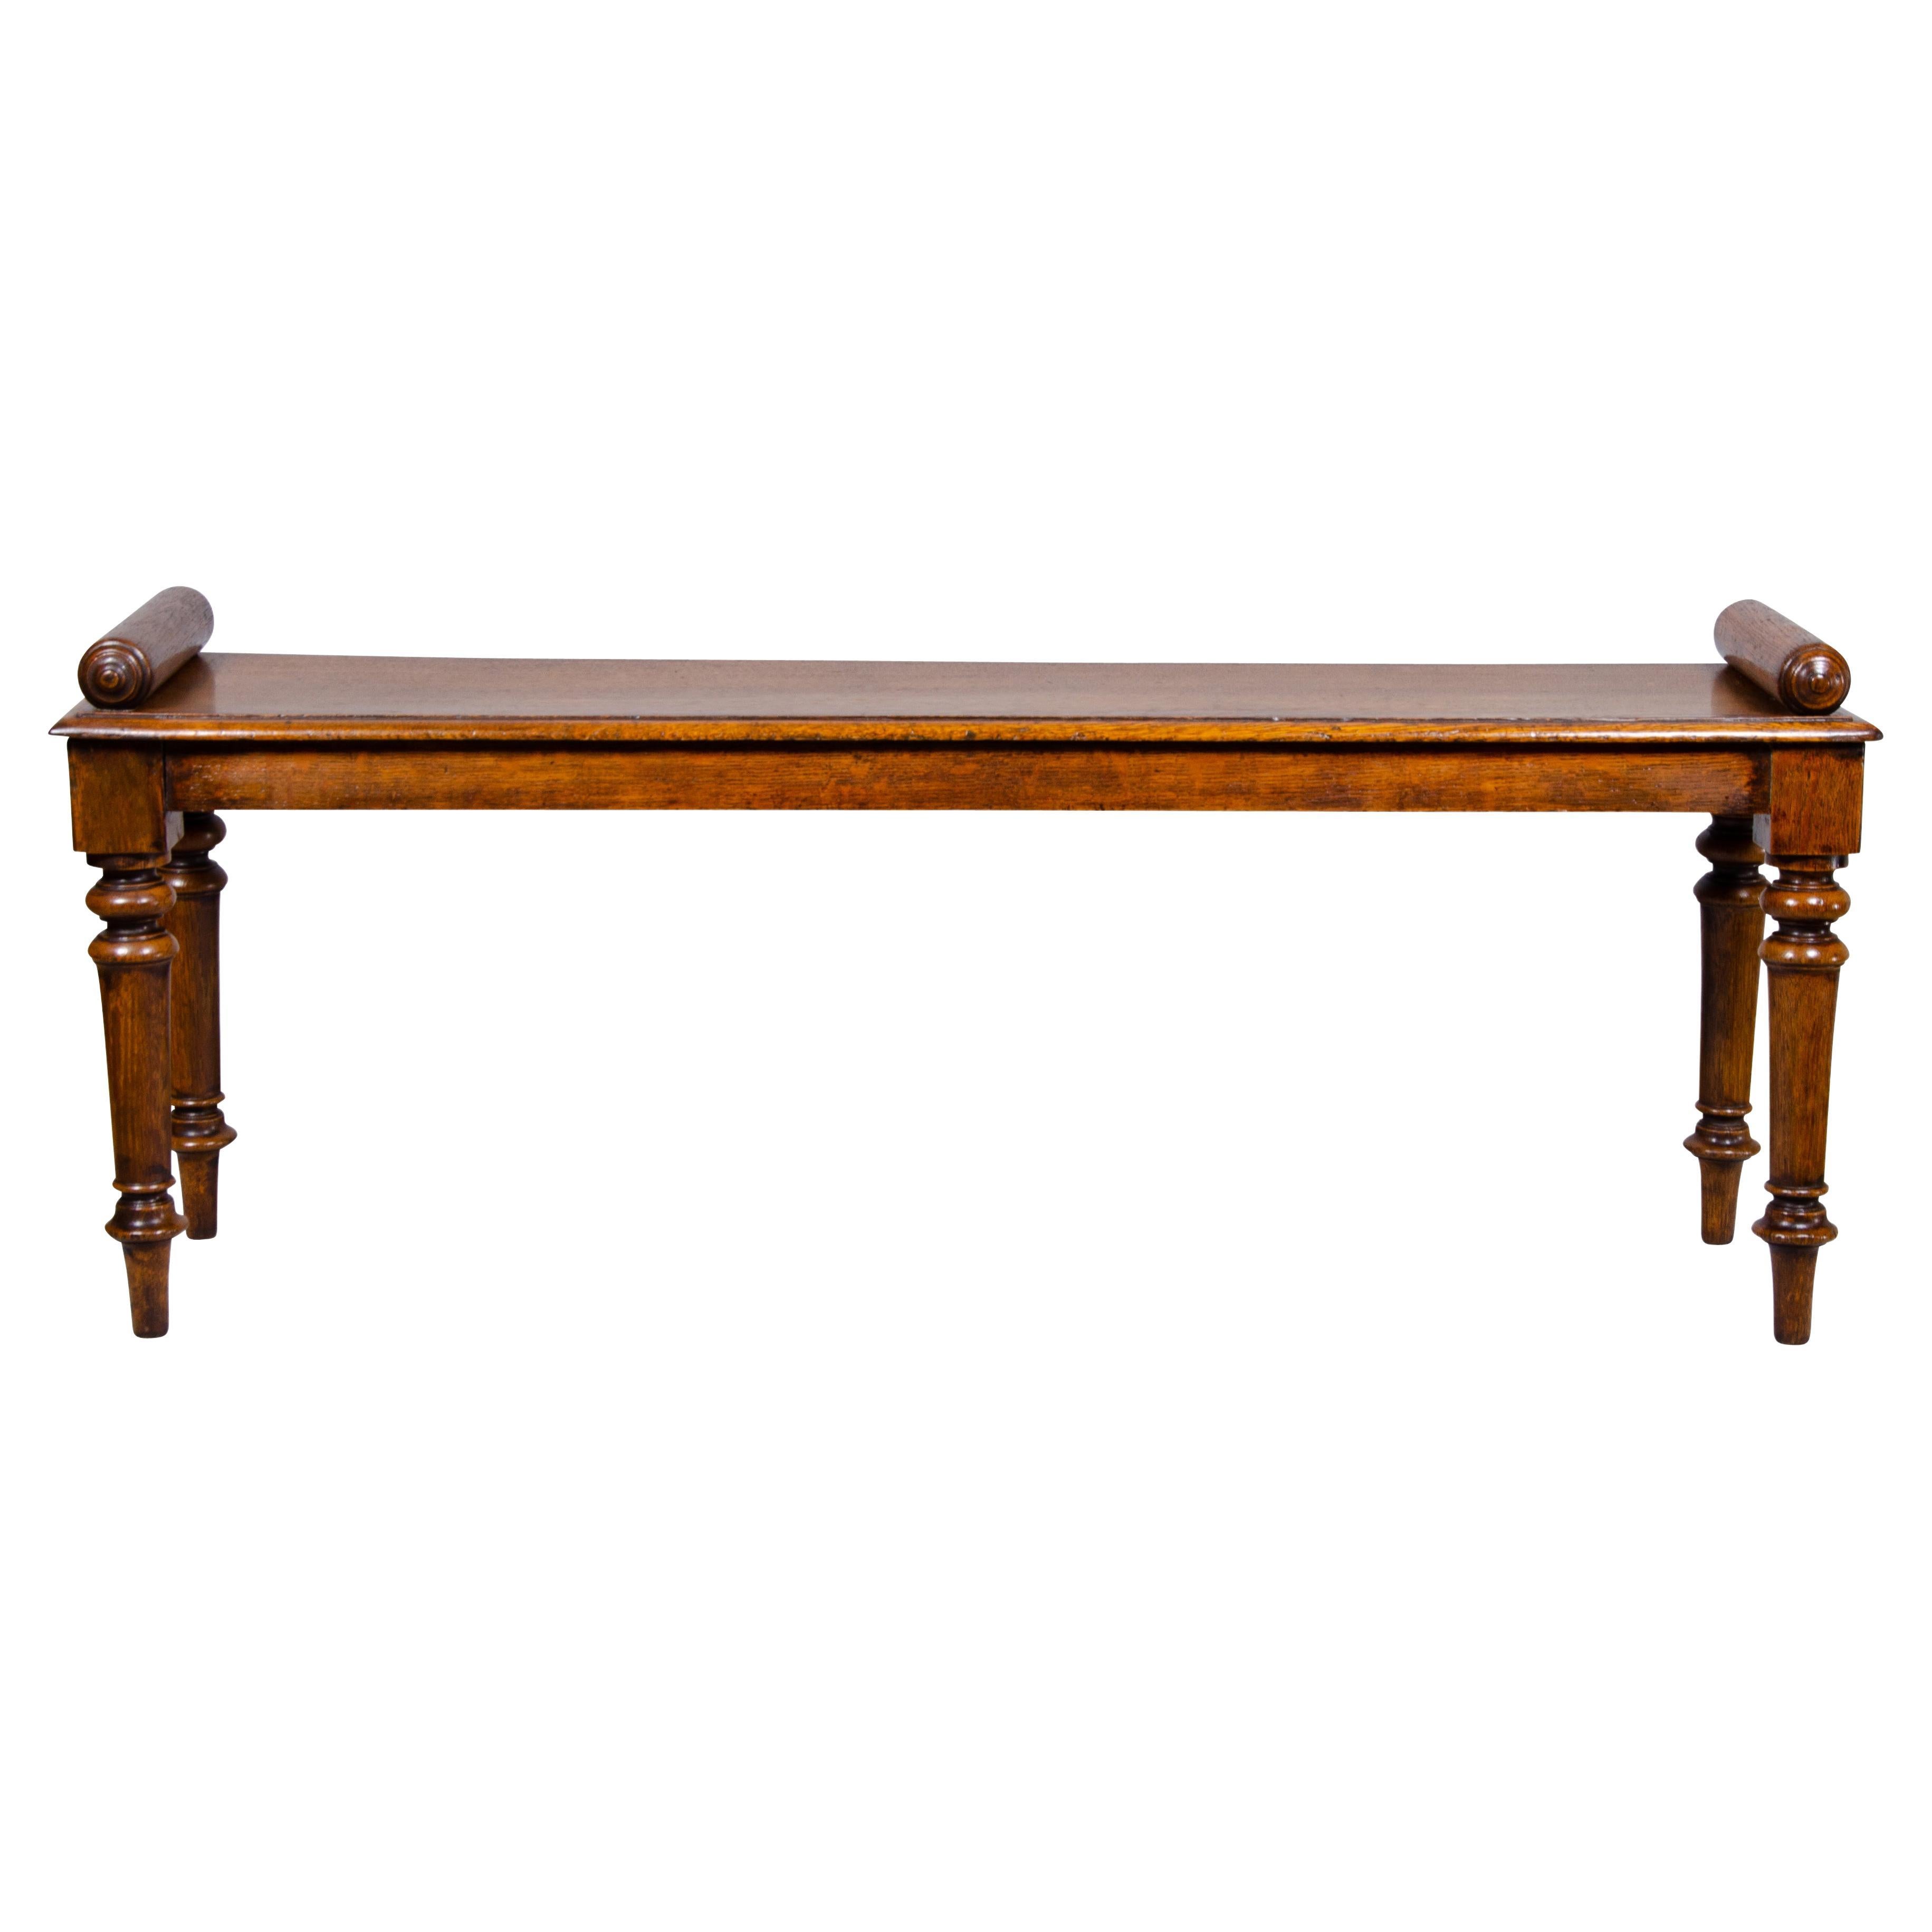 Edwardian Oak Bench Attributed to Schoolbred